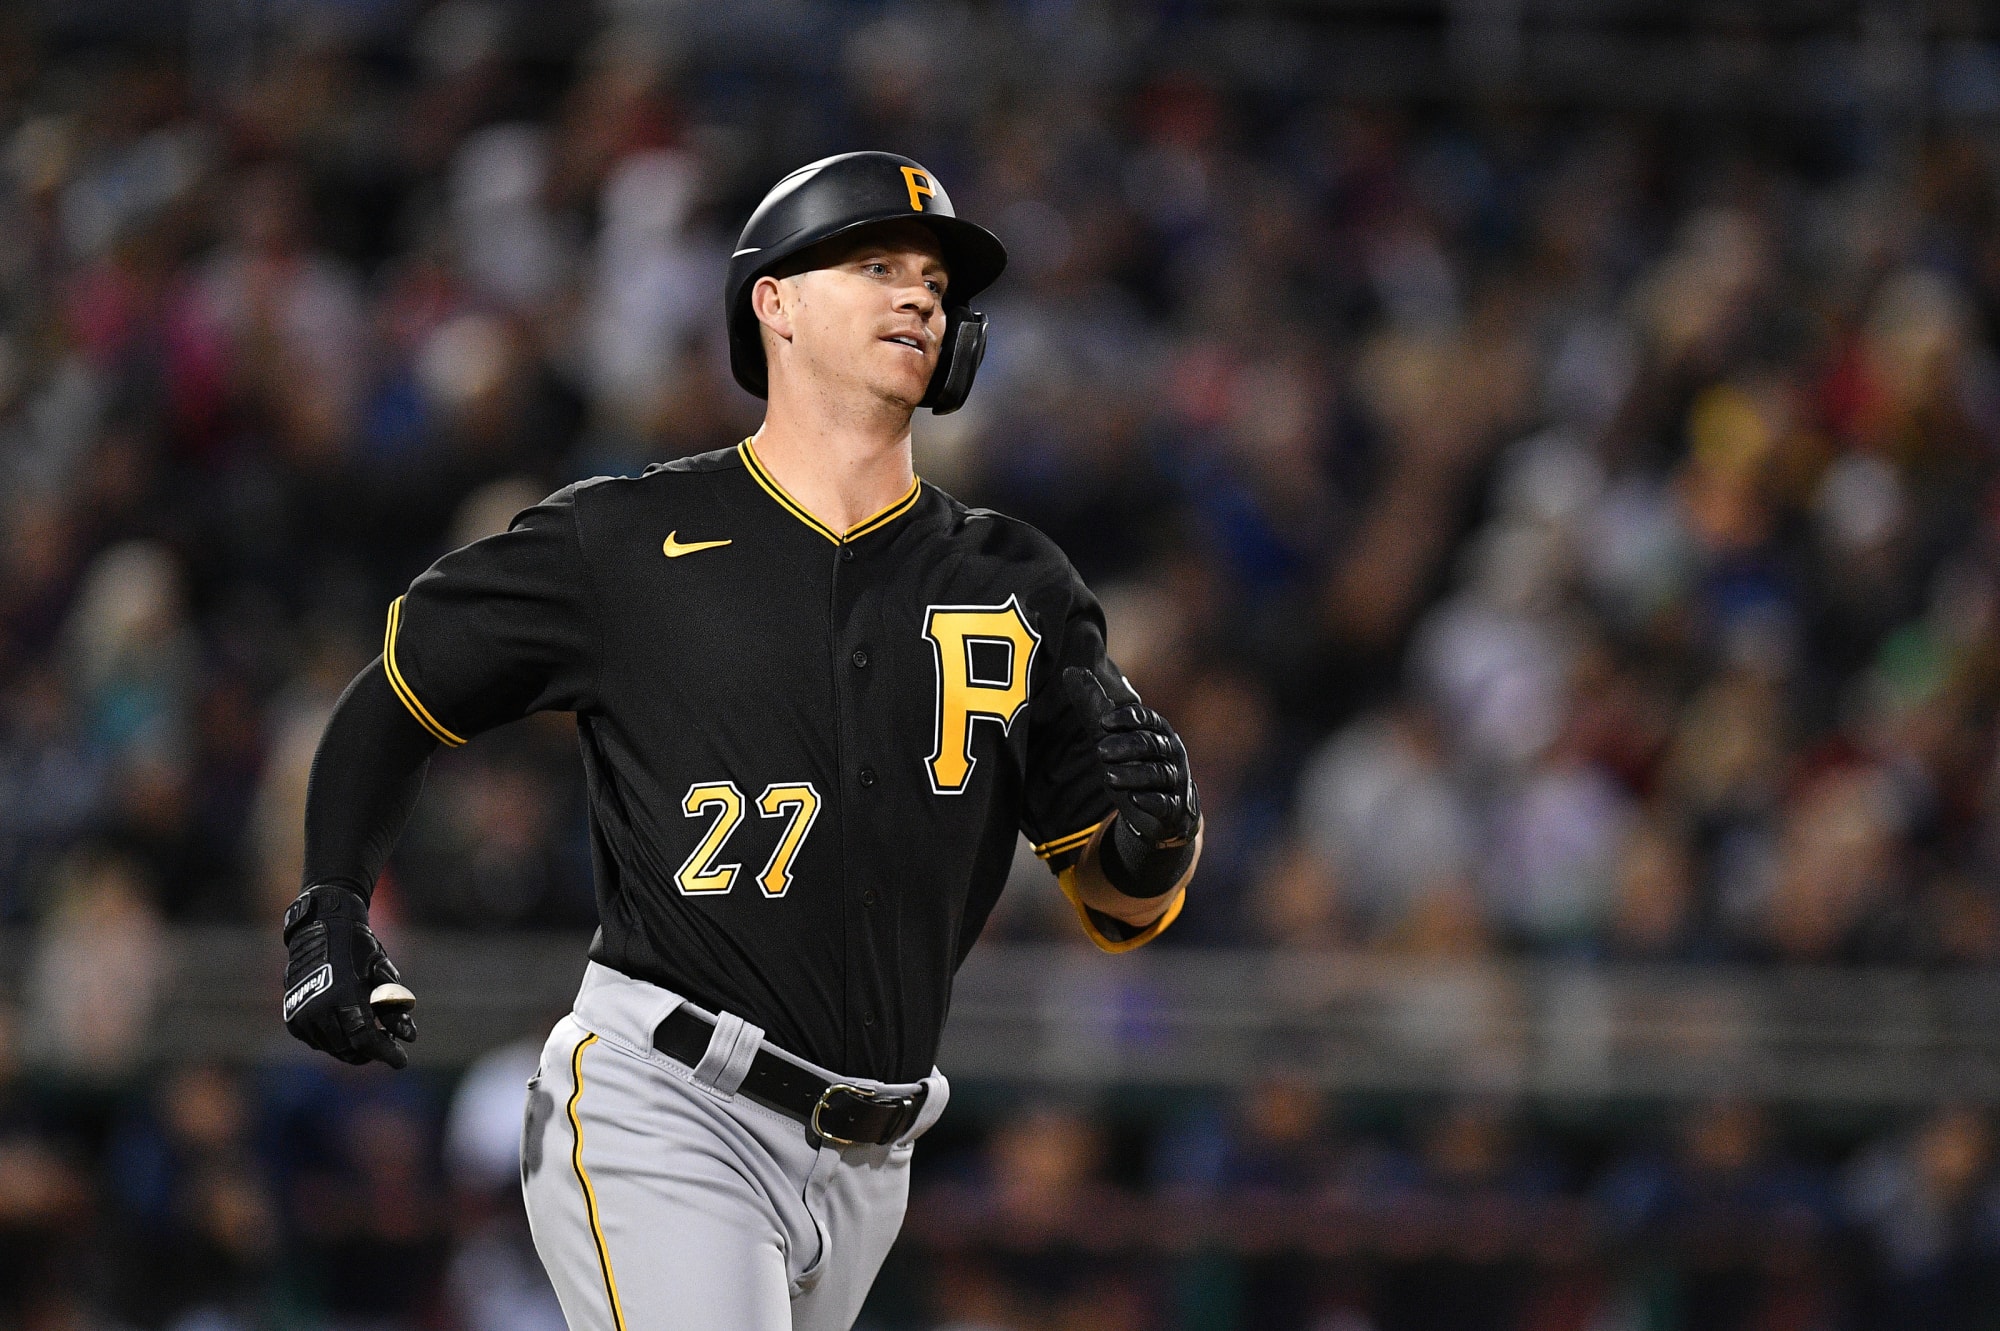 Pittsburgh Pirates Shortstop Kevin Newman is a Regression Candidate